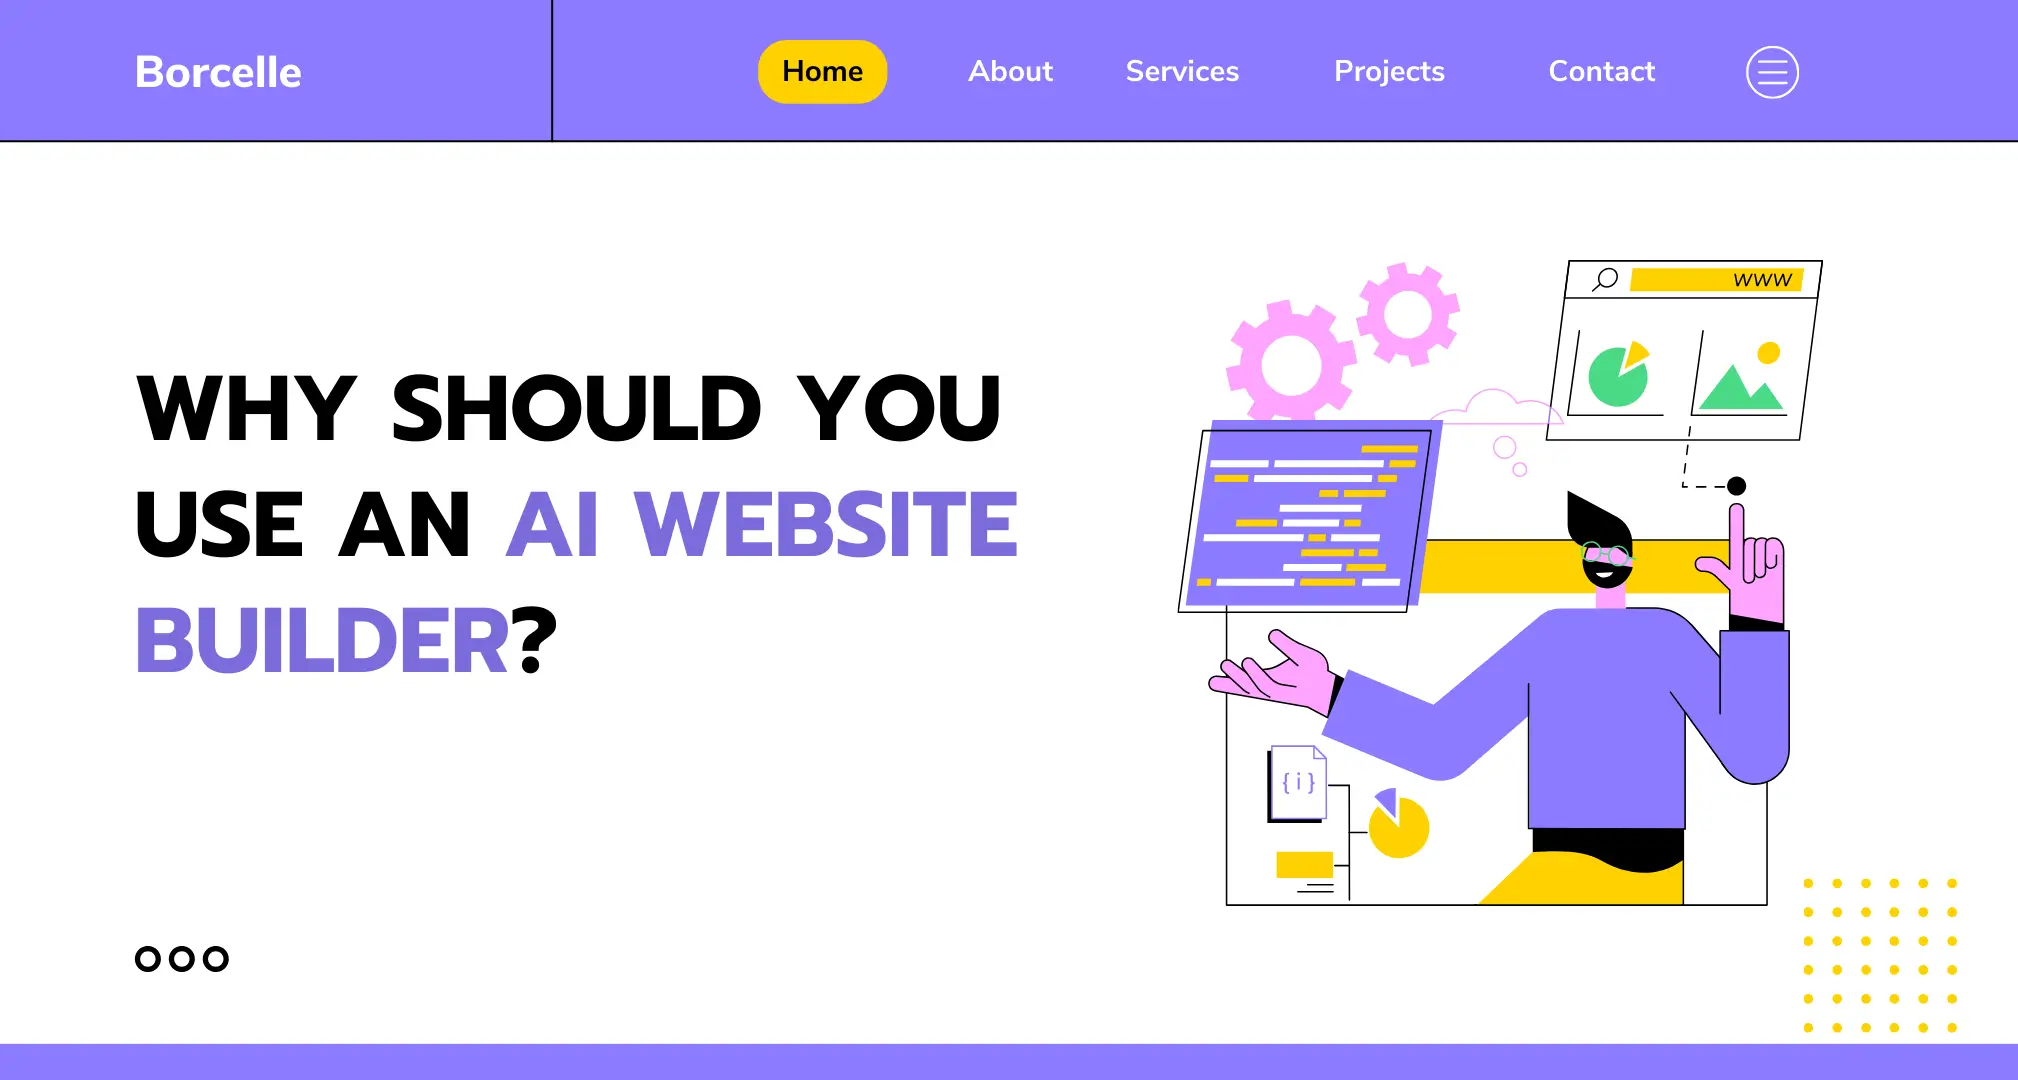 Why Should You Use an AI Website Builder?